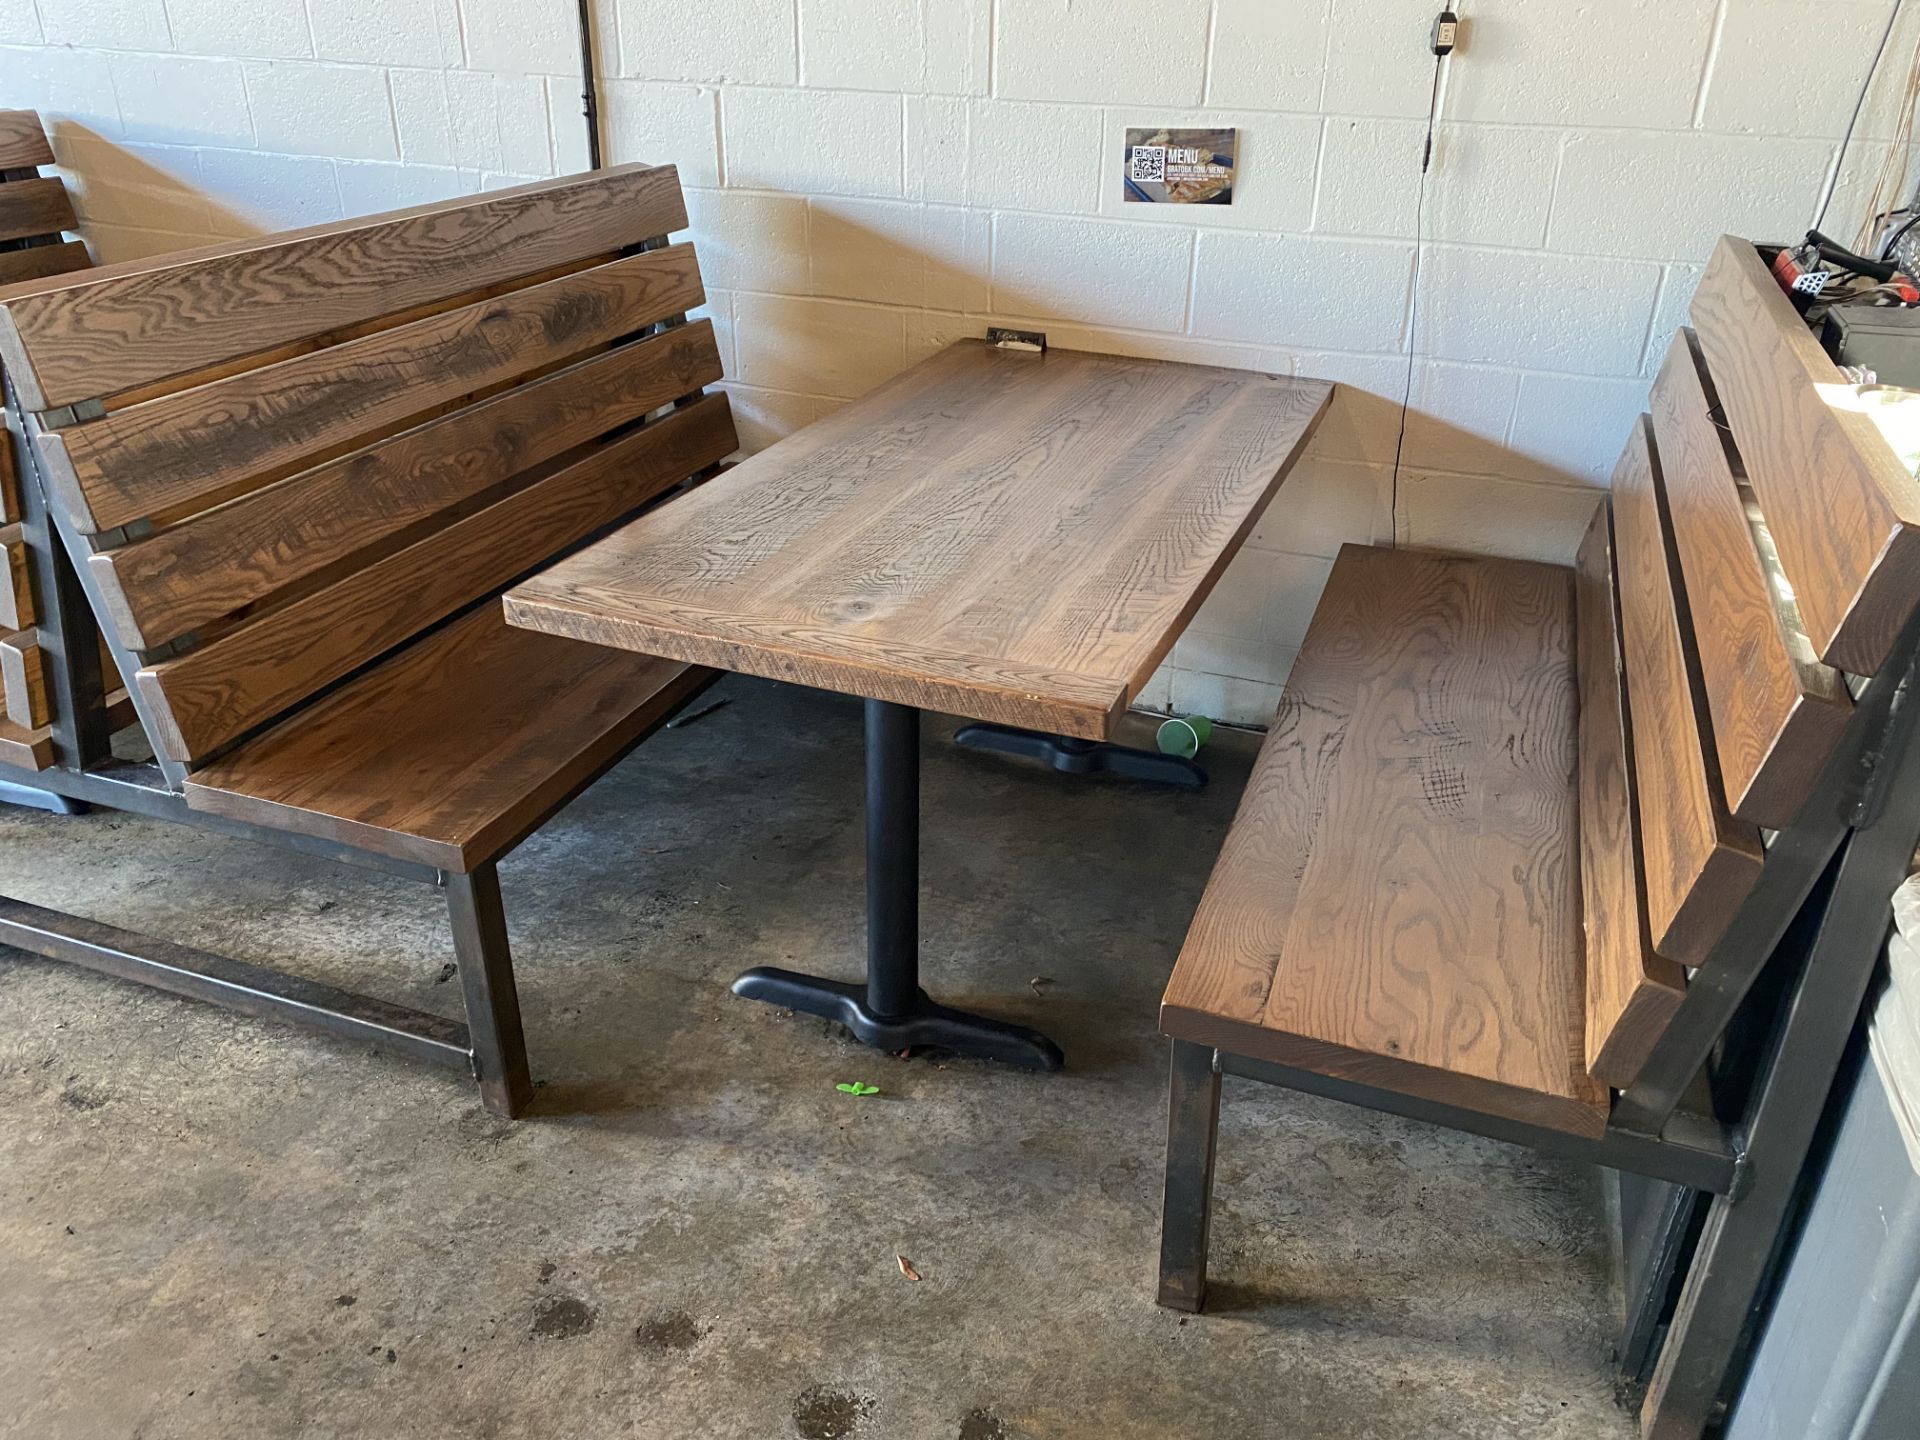 (5) Sets of 5' Steel Framed Wood Seat & Back Booths w/Matching Tables (Amish Made Leesburg Style